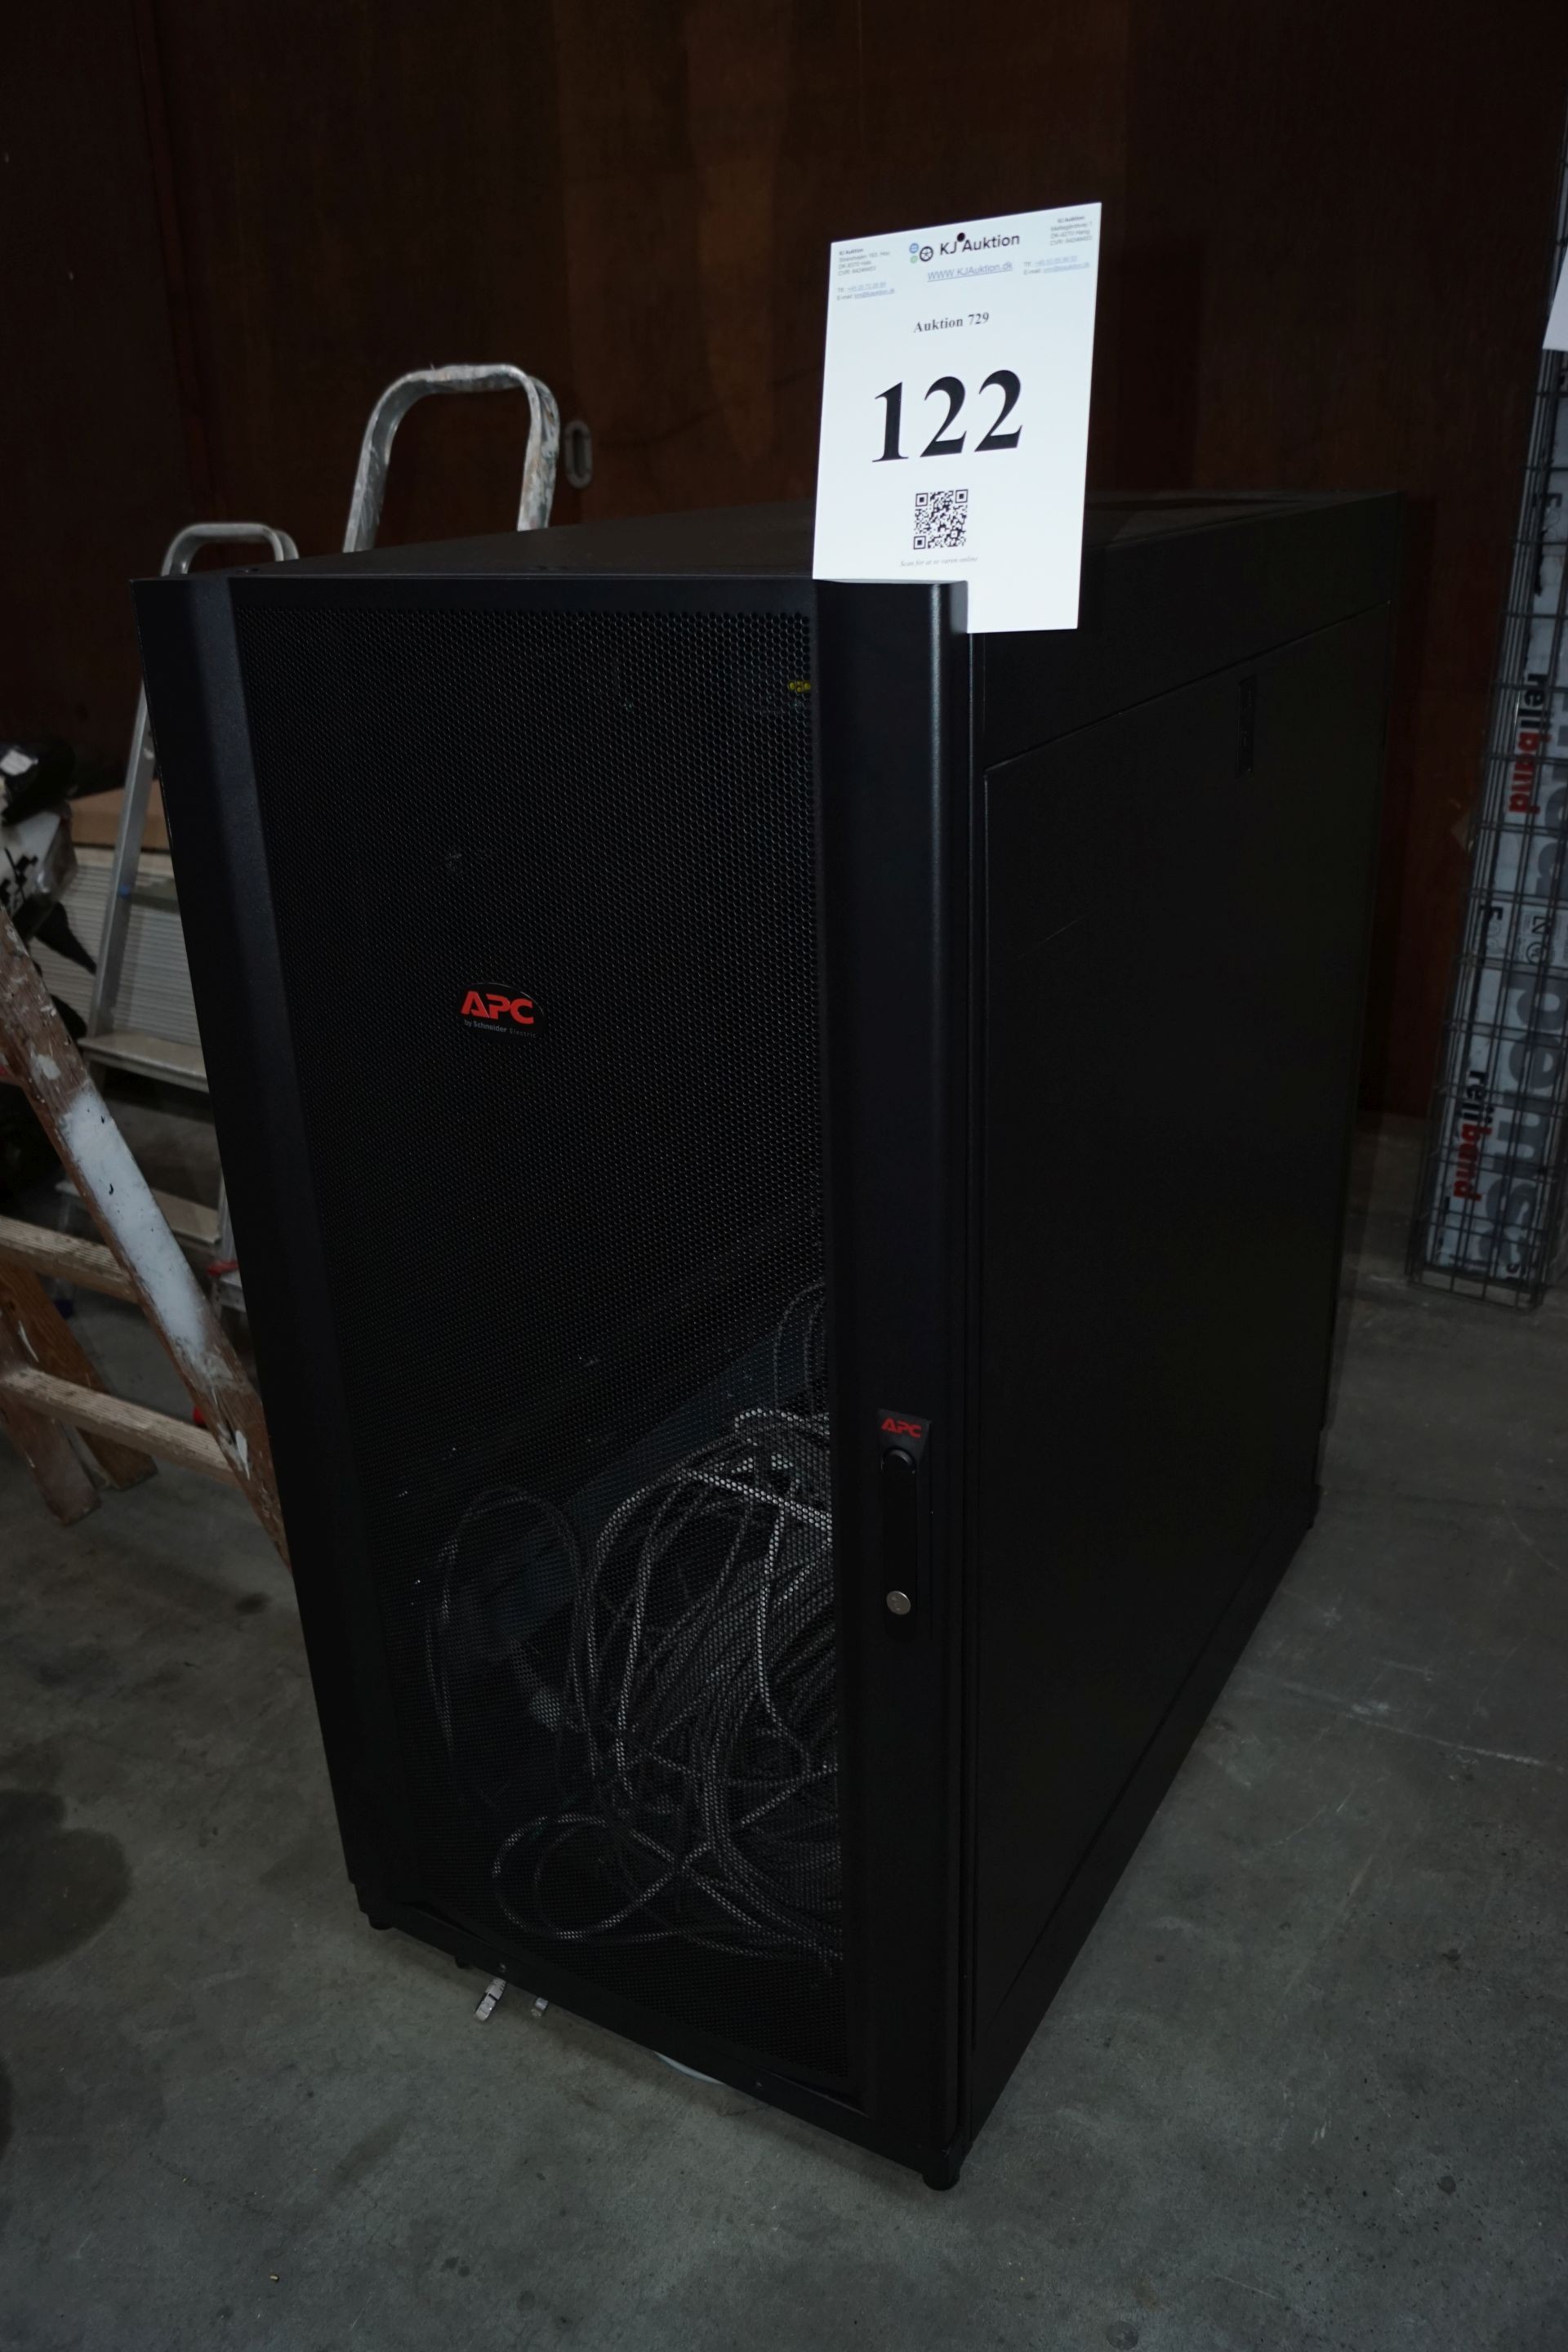 Server rack cabinet brand: apc by cables included. max weight 255 kg. 60x107x120 - KJ Auktion - Machine auctions